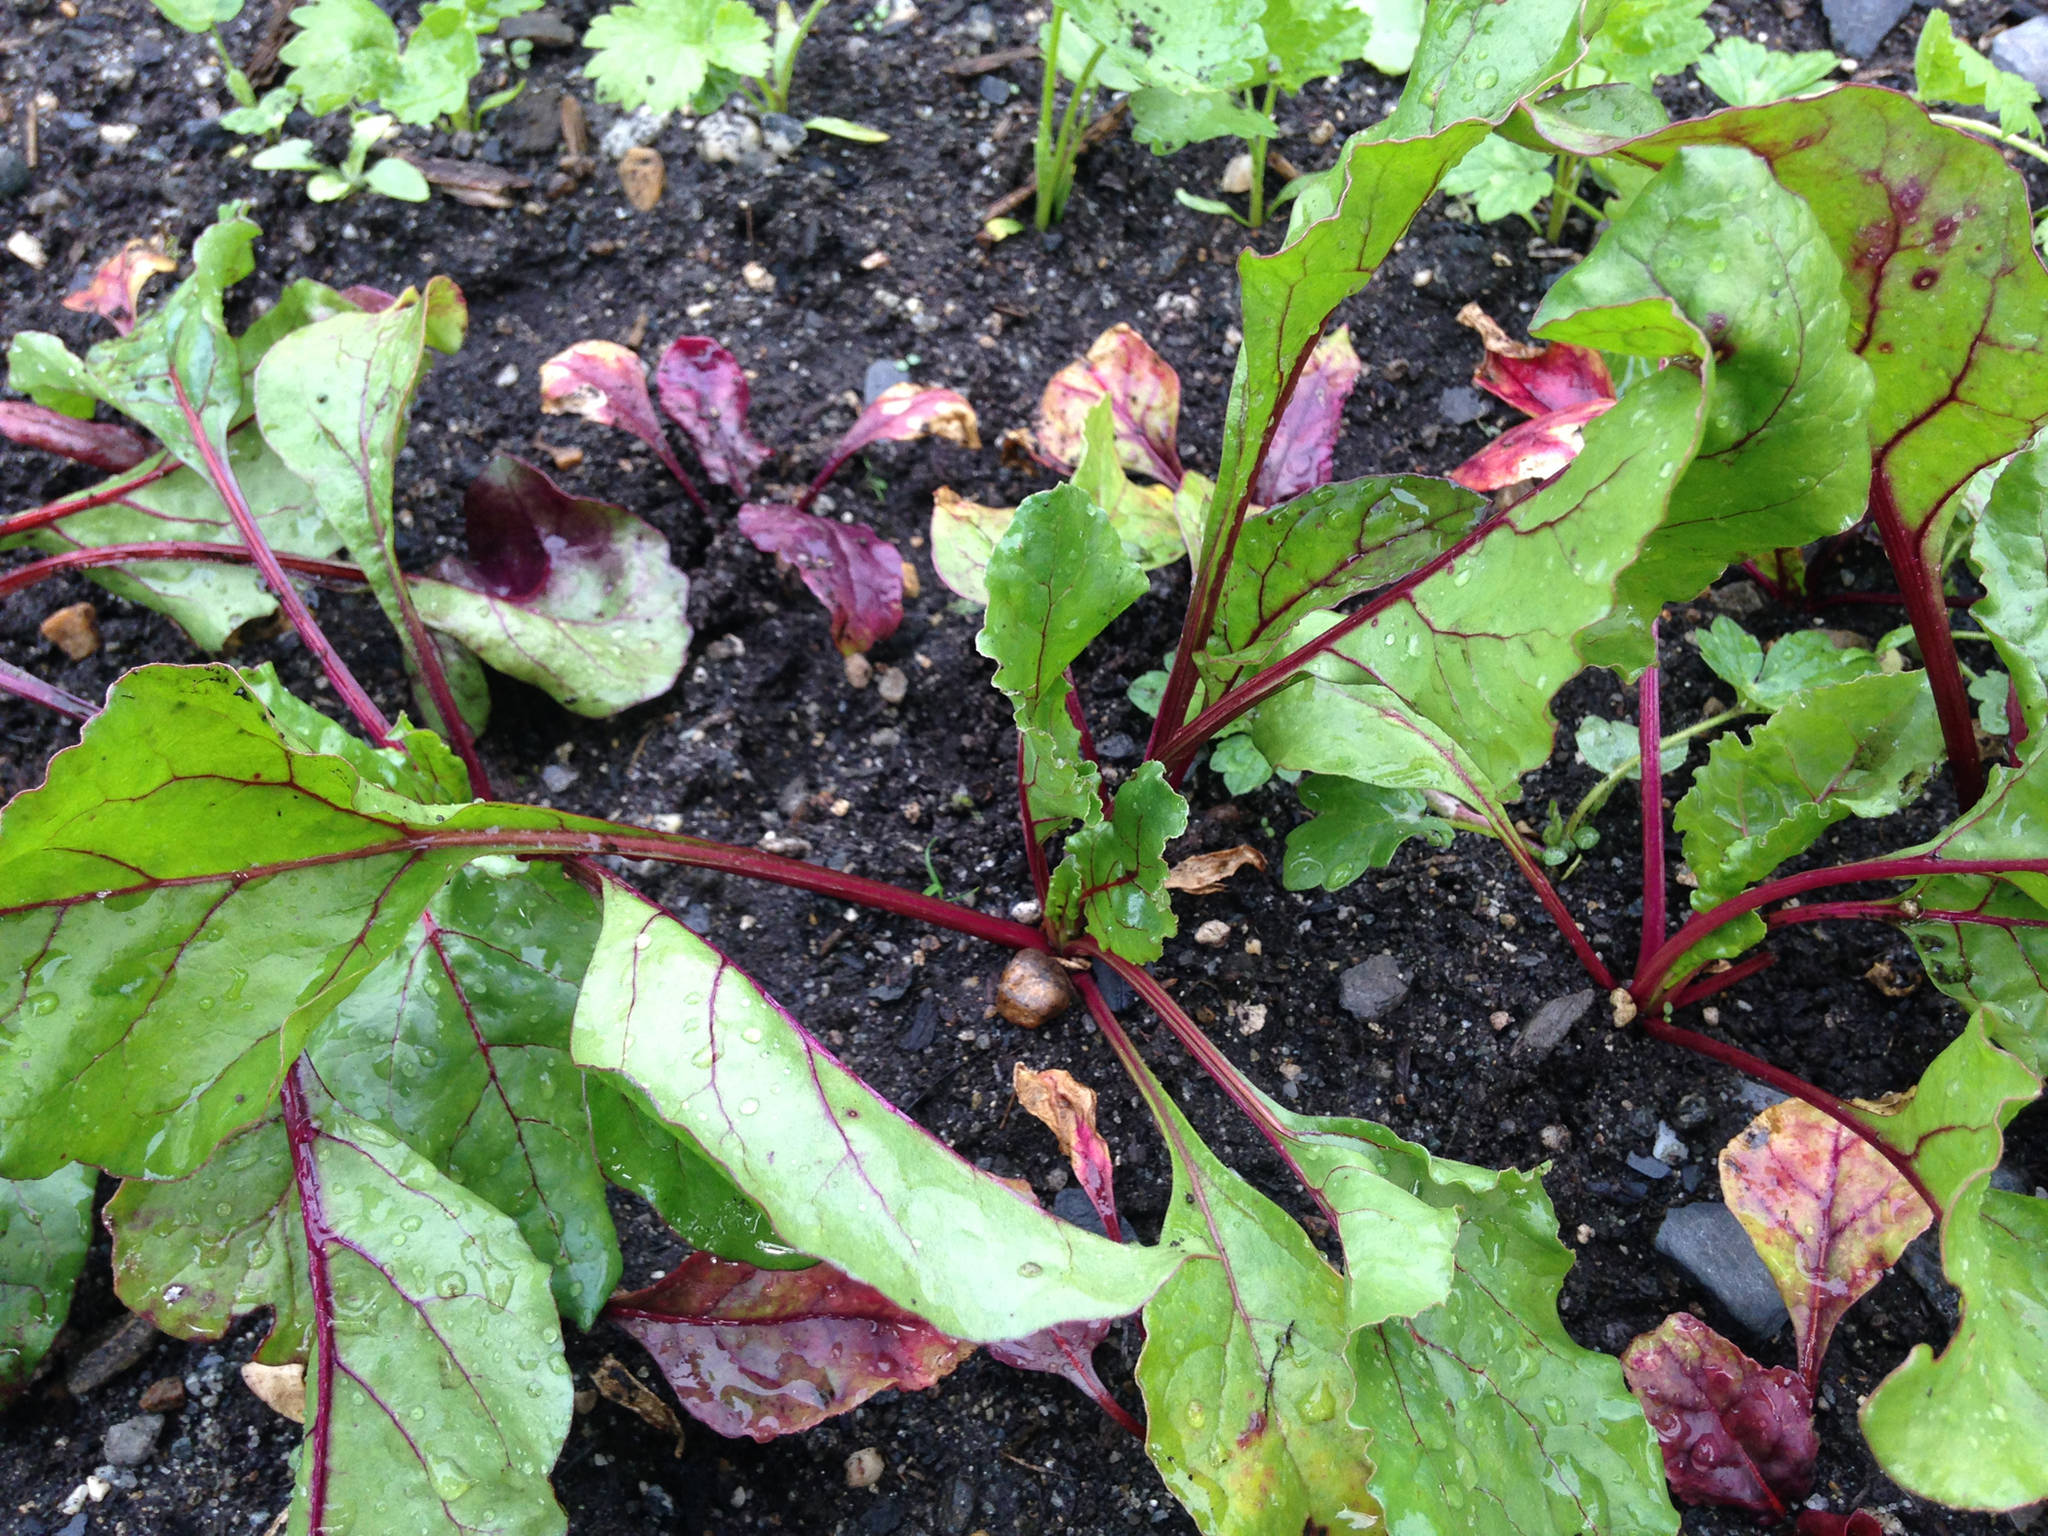 Healthy beets alongside those not faring as well. (Corinne Conlon | For the Juneau Empire)